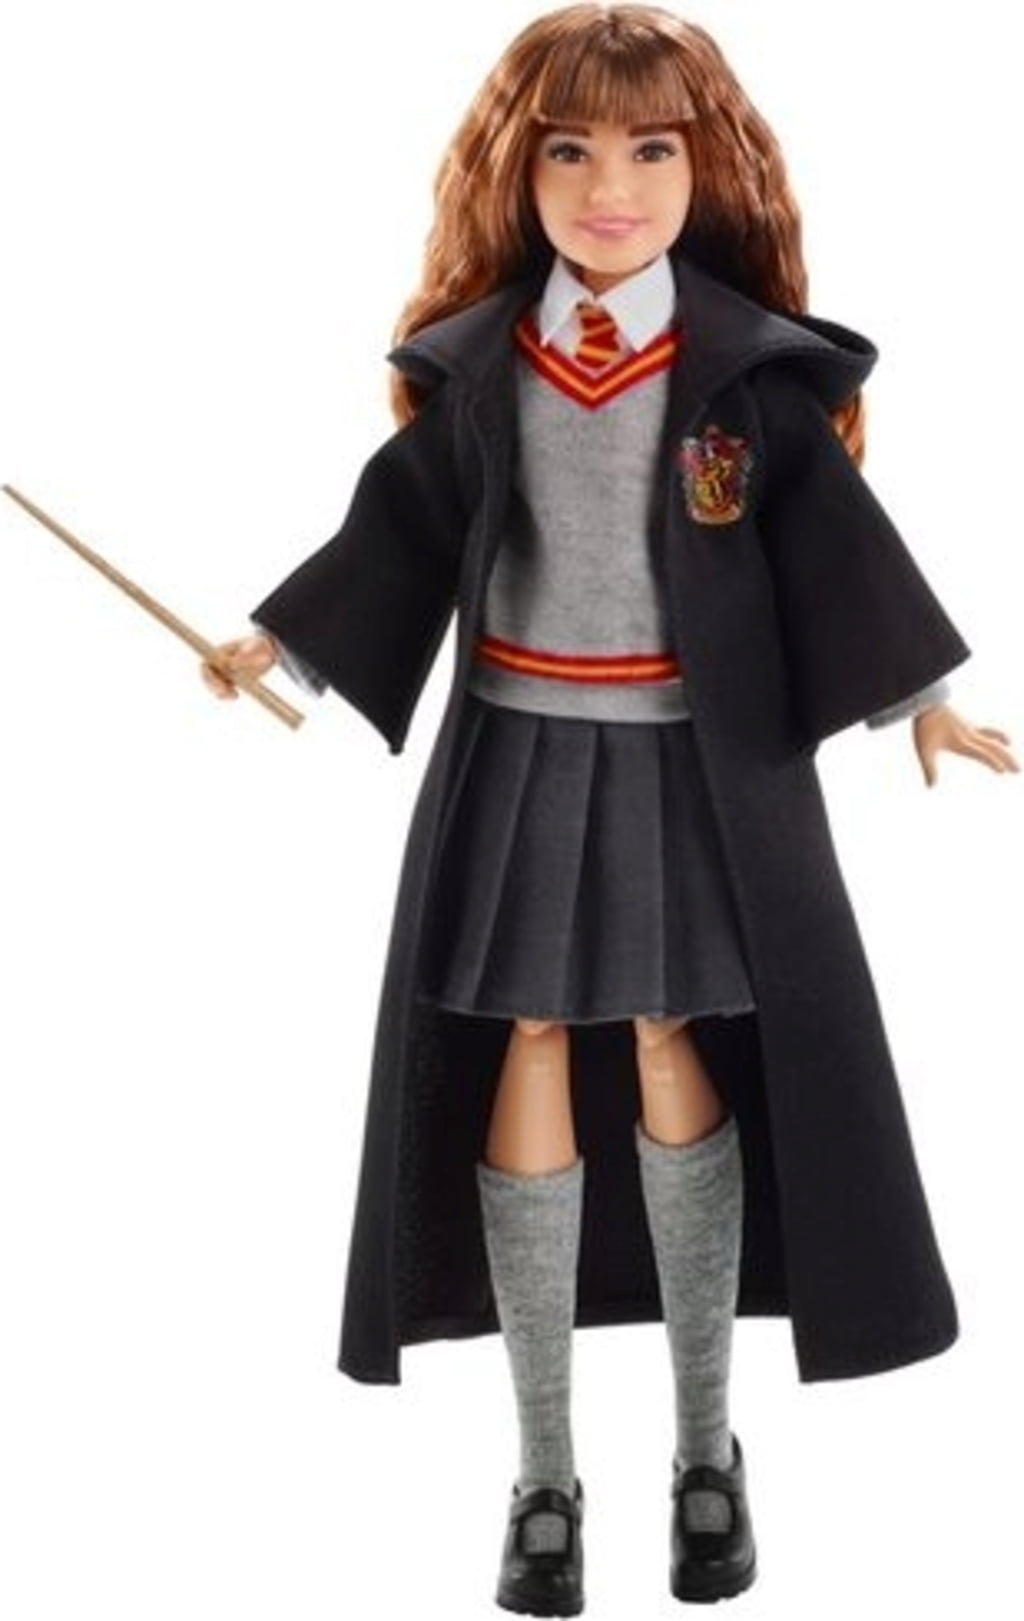 MATTEL Harry Potter and the Chamber of Secrets - Hermione Granger